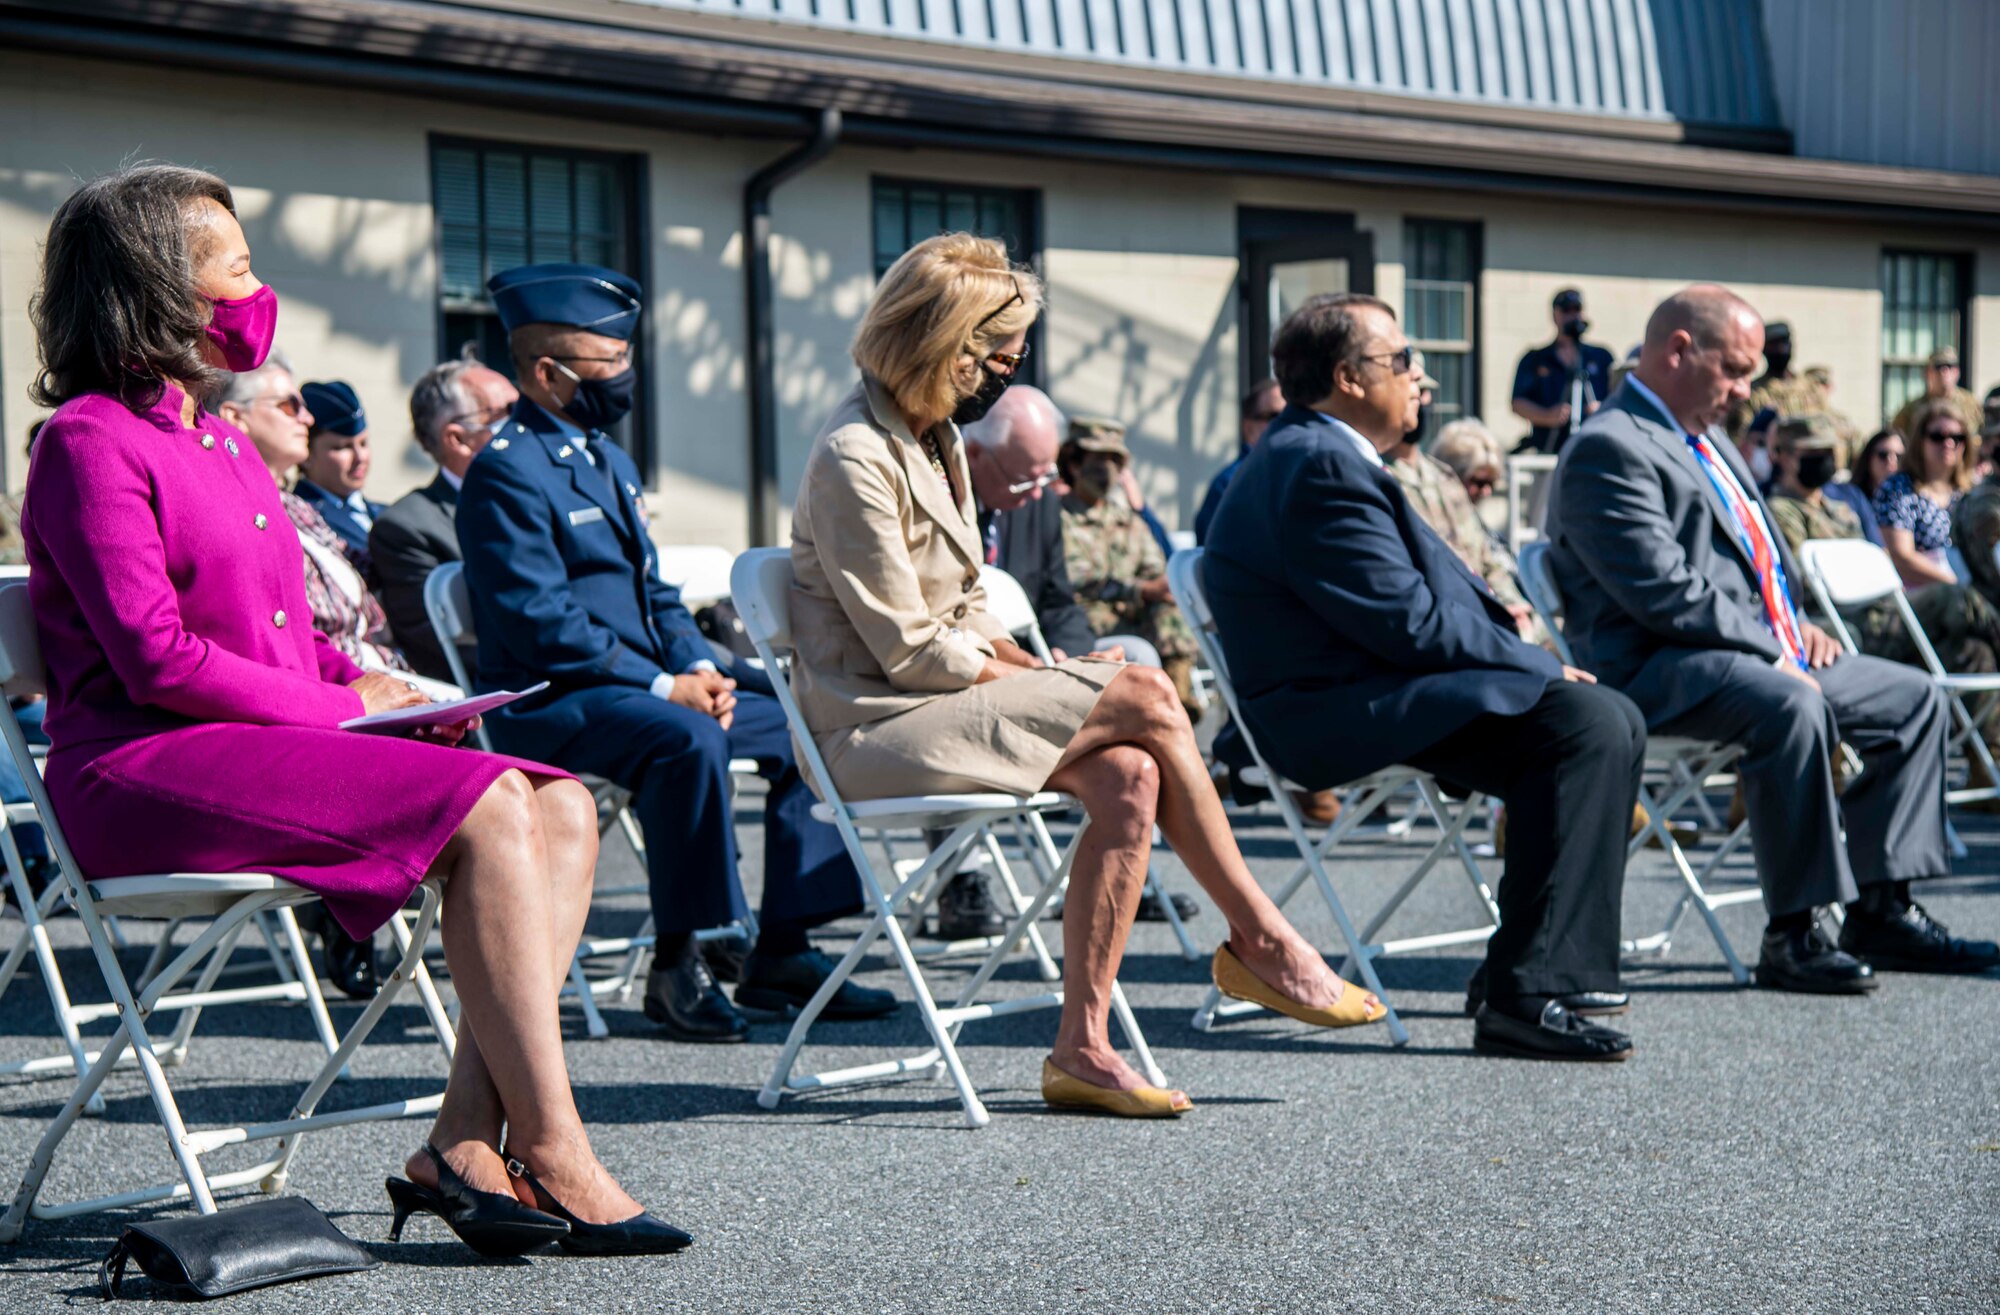 From left, Rep. Lisa Blunt Rochester, Delaware congresswoman, Kate Rohrer, representative for Delaware Senator Chris Coons, Robin Christiansen, City of Dover mayor, and Retired Air Force Reserve Master Sgt. Tyree Bacon, guest speaker, attend the 20th Anniversary 9/11 Remembrance Ceremony held at the Air Mobility Command Museum’s 9/11 Memorial on Dover Air Force Base, Delaware, Sept. 11, 2021. The base hosted the ceremony to remember and honor those who perished in the attacks on Sept. 11, 2001. (U.S. Air Force photo by Senior Airman Stephani Barge)